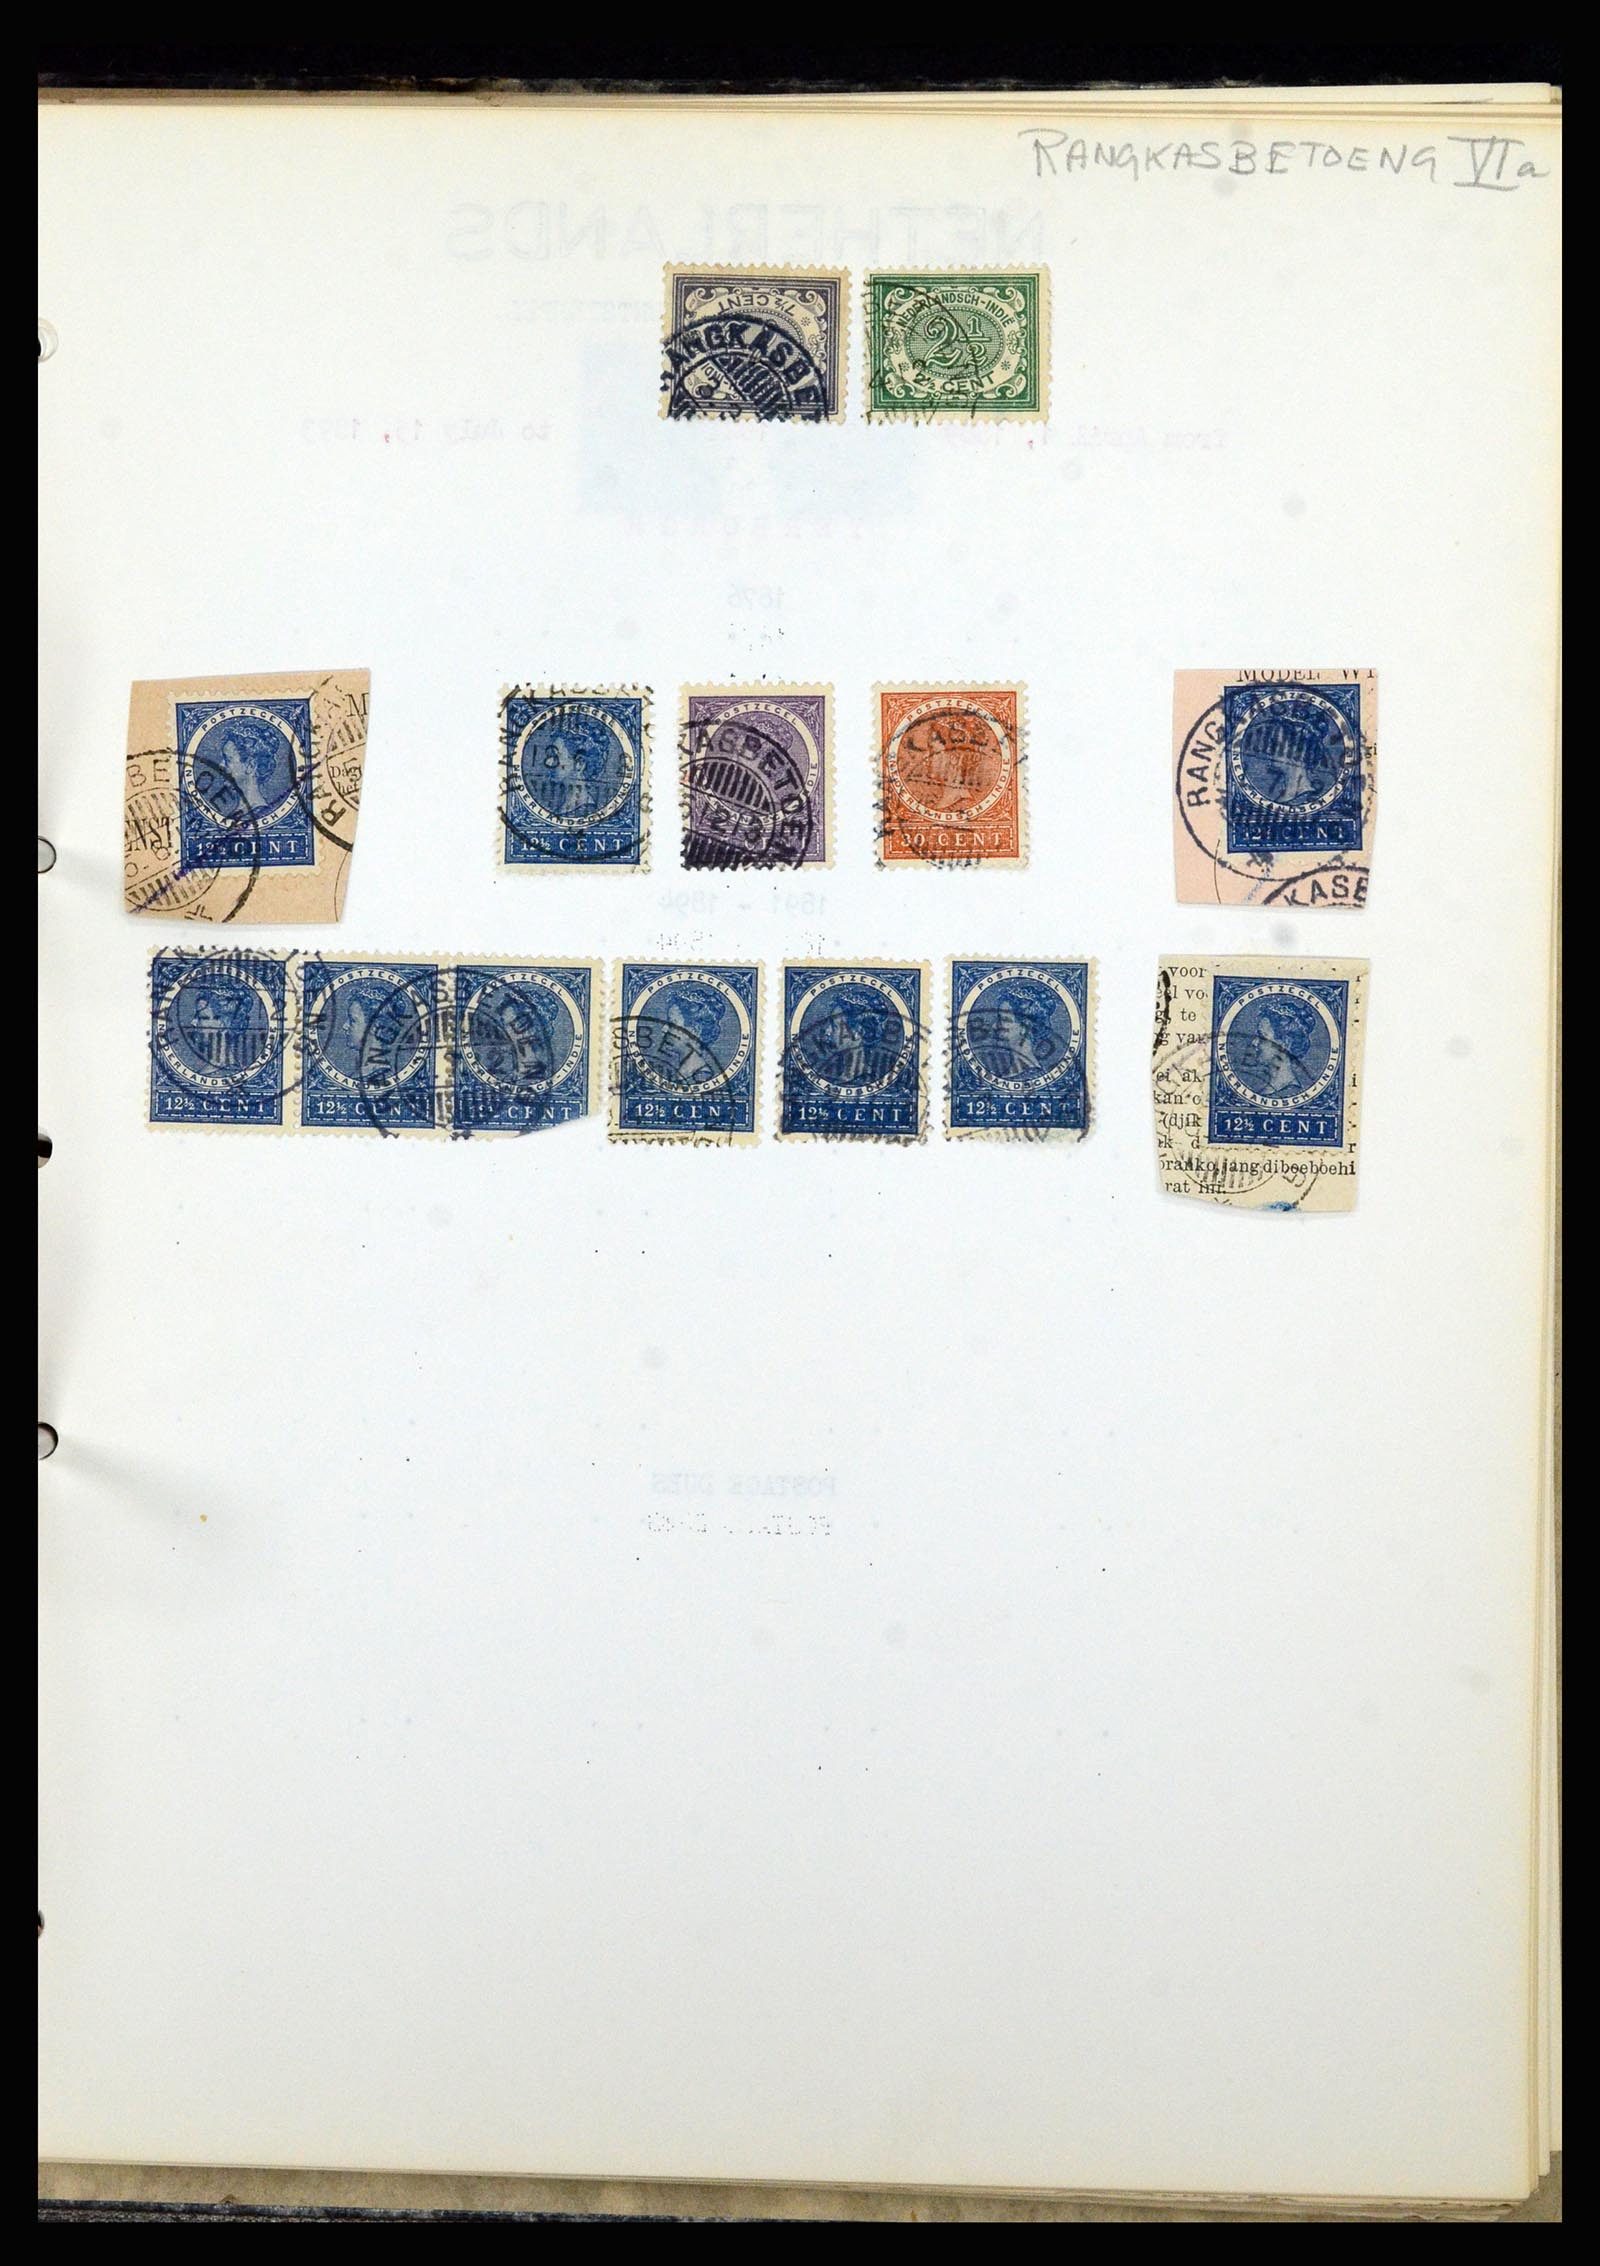 36841 100 - Stamp collection 36841 Dutch east Indies short bar cancels.